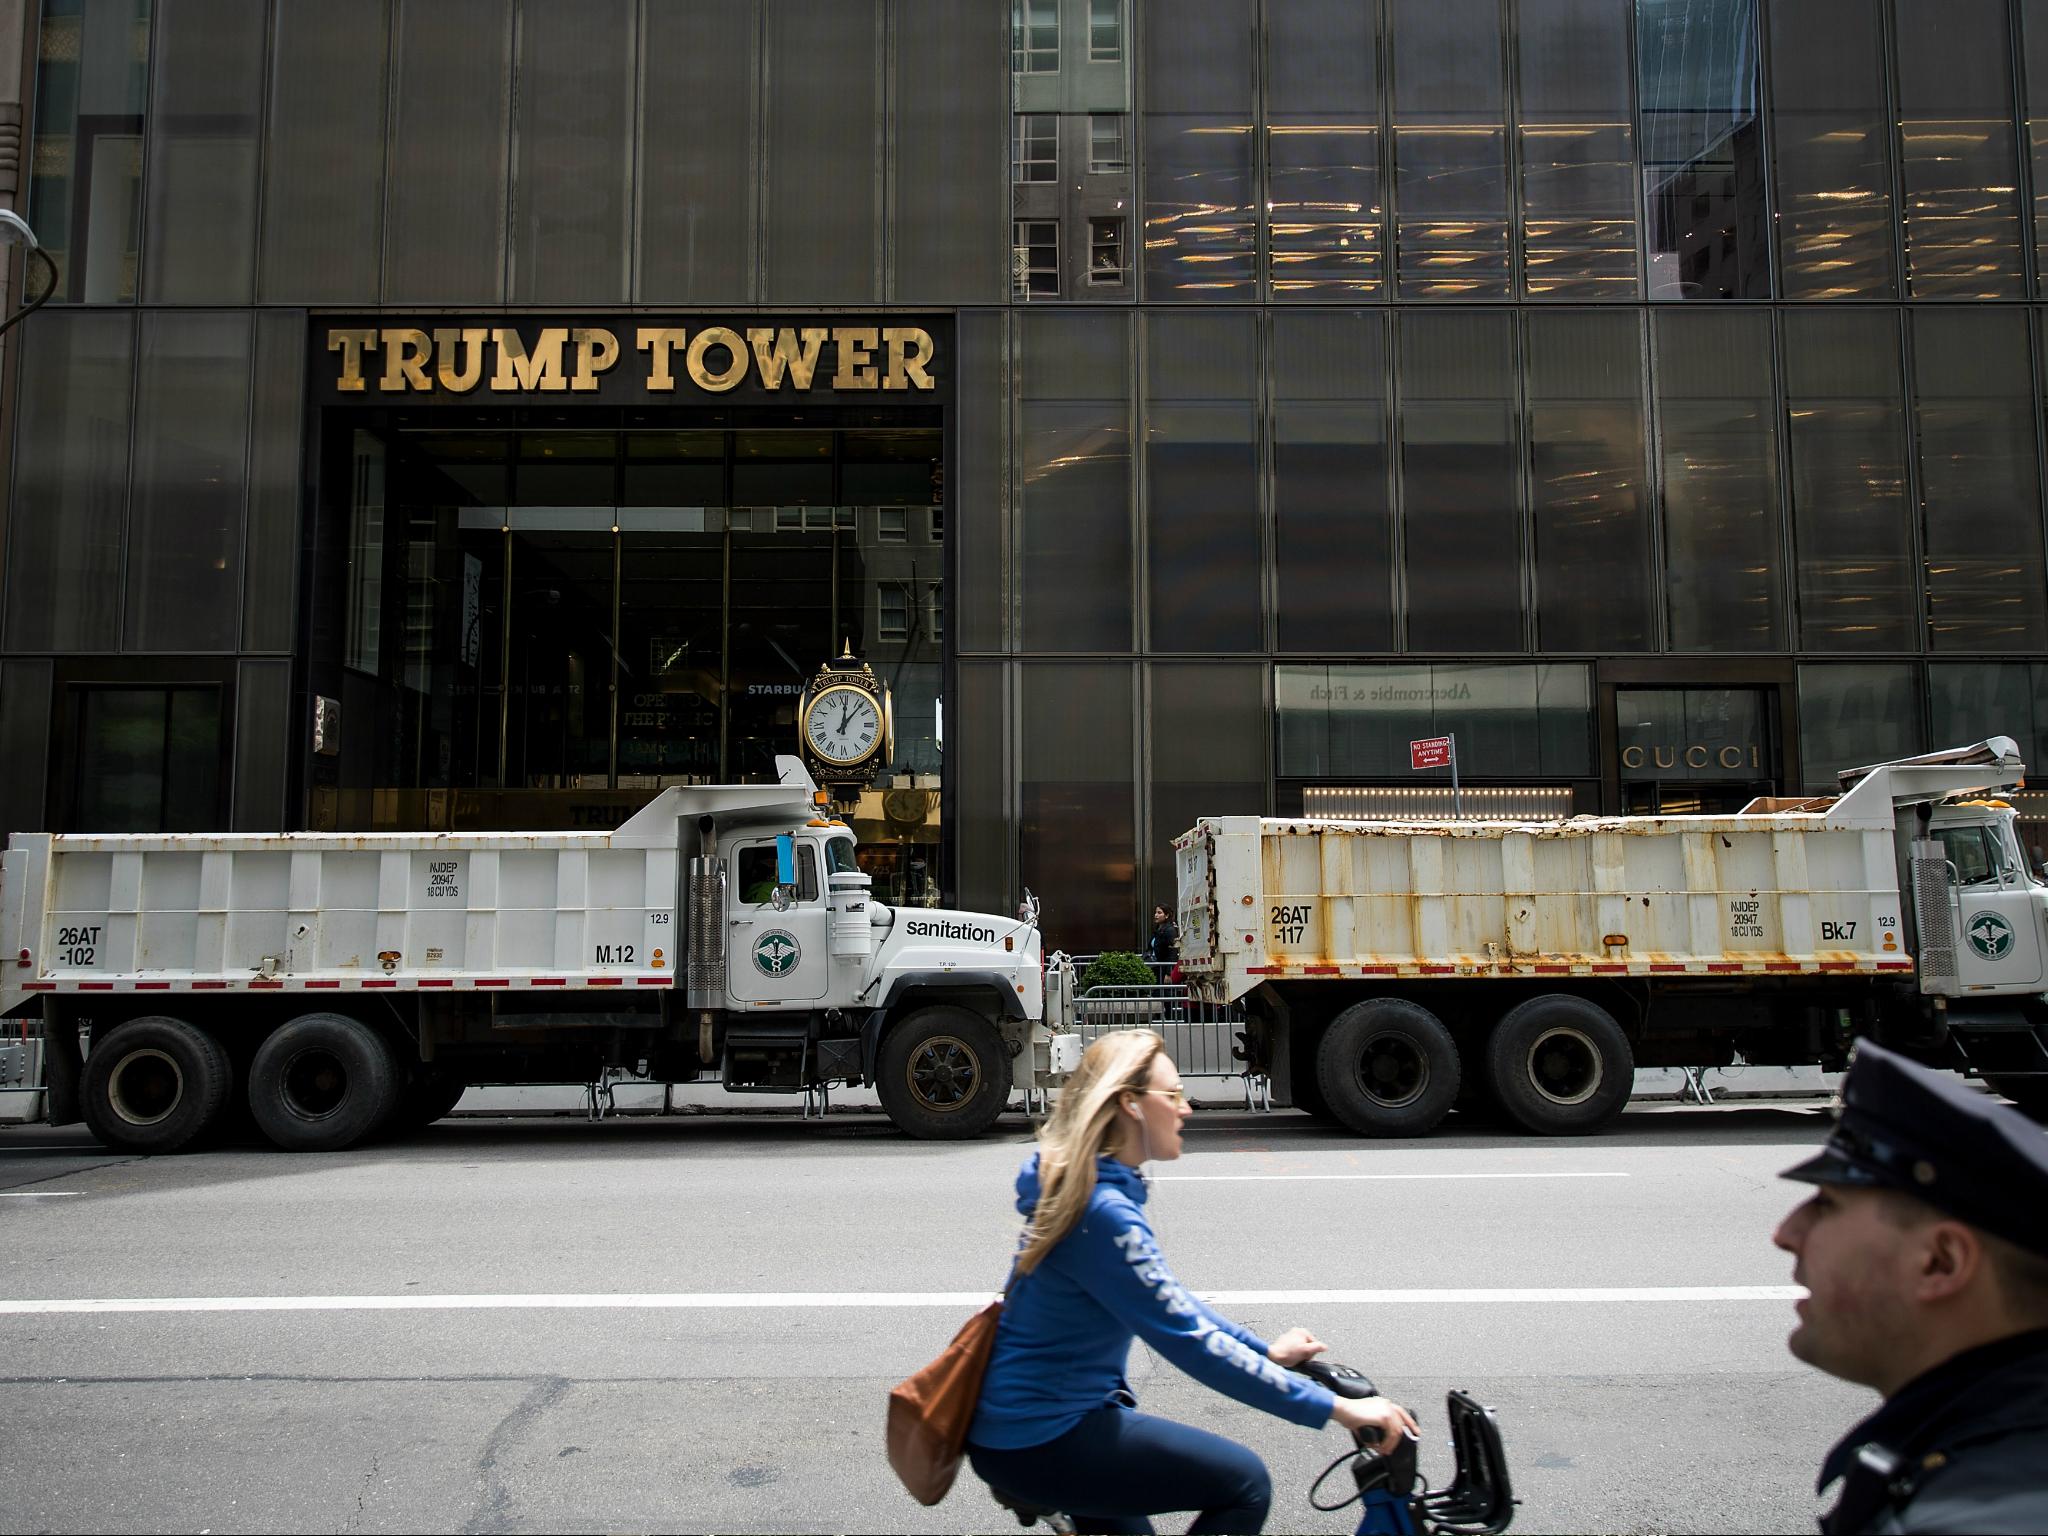 The US military has a $130,000 a month lease for an office space in Trump Tower, a building owned by Donald Trump